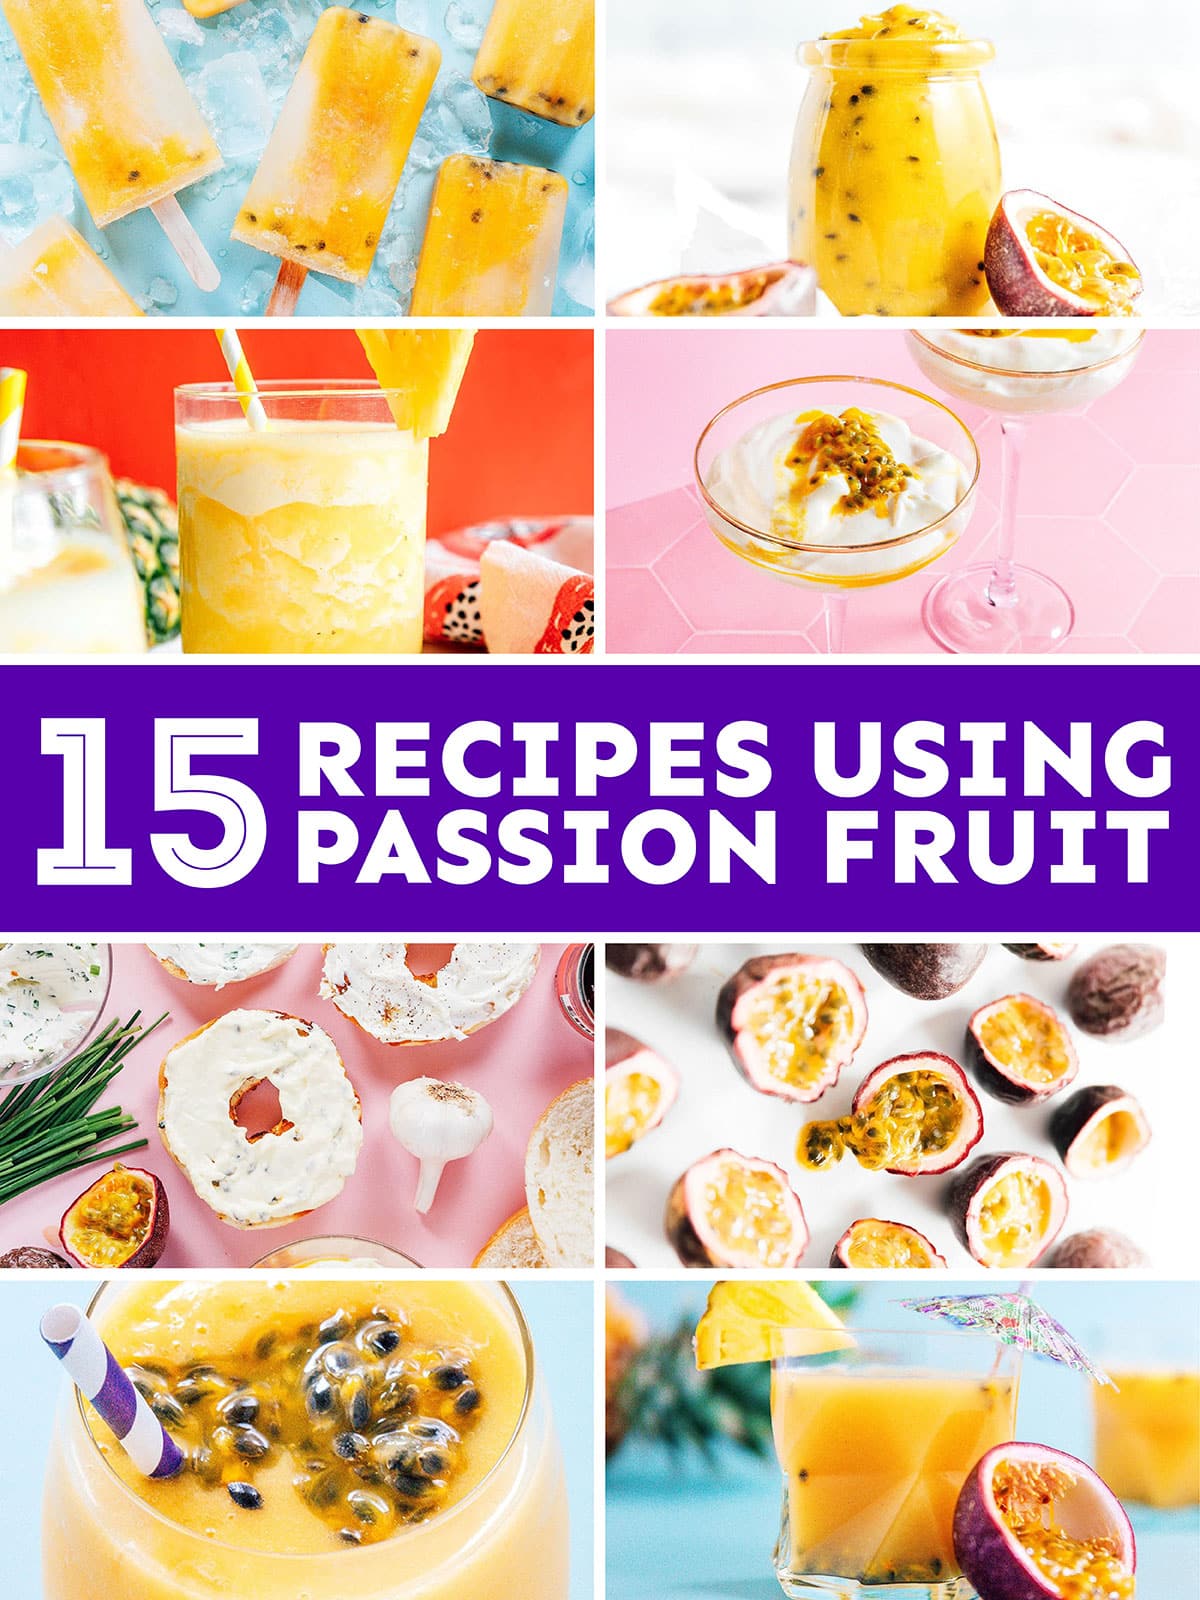 Collage that says "15 recipes using passion fruit".